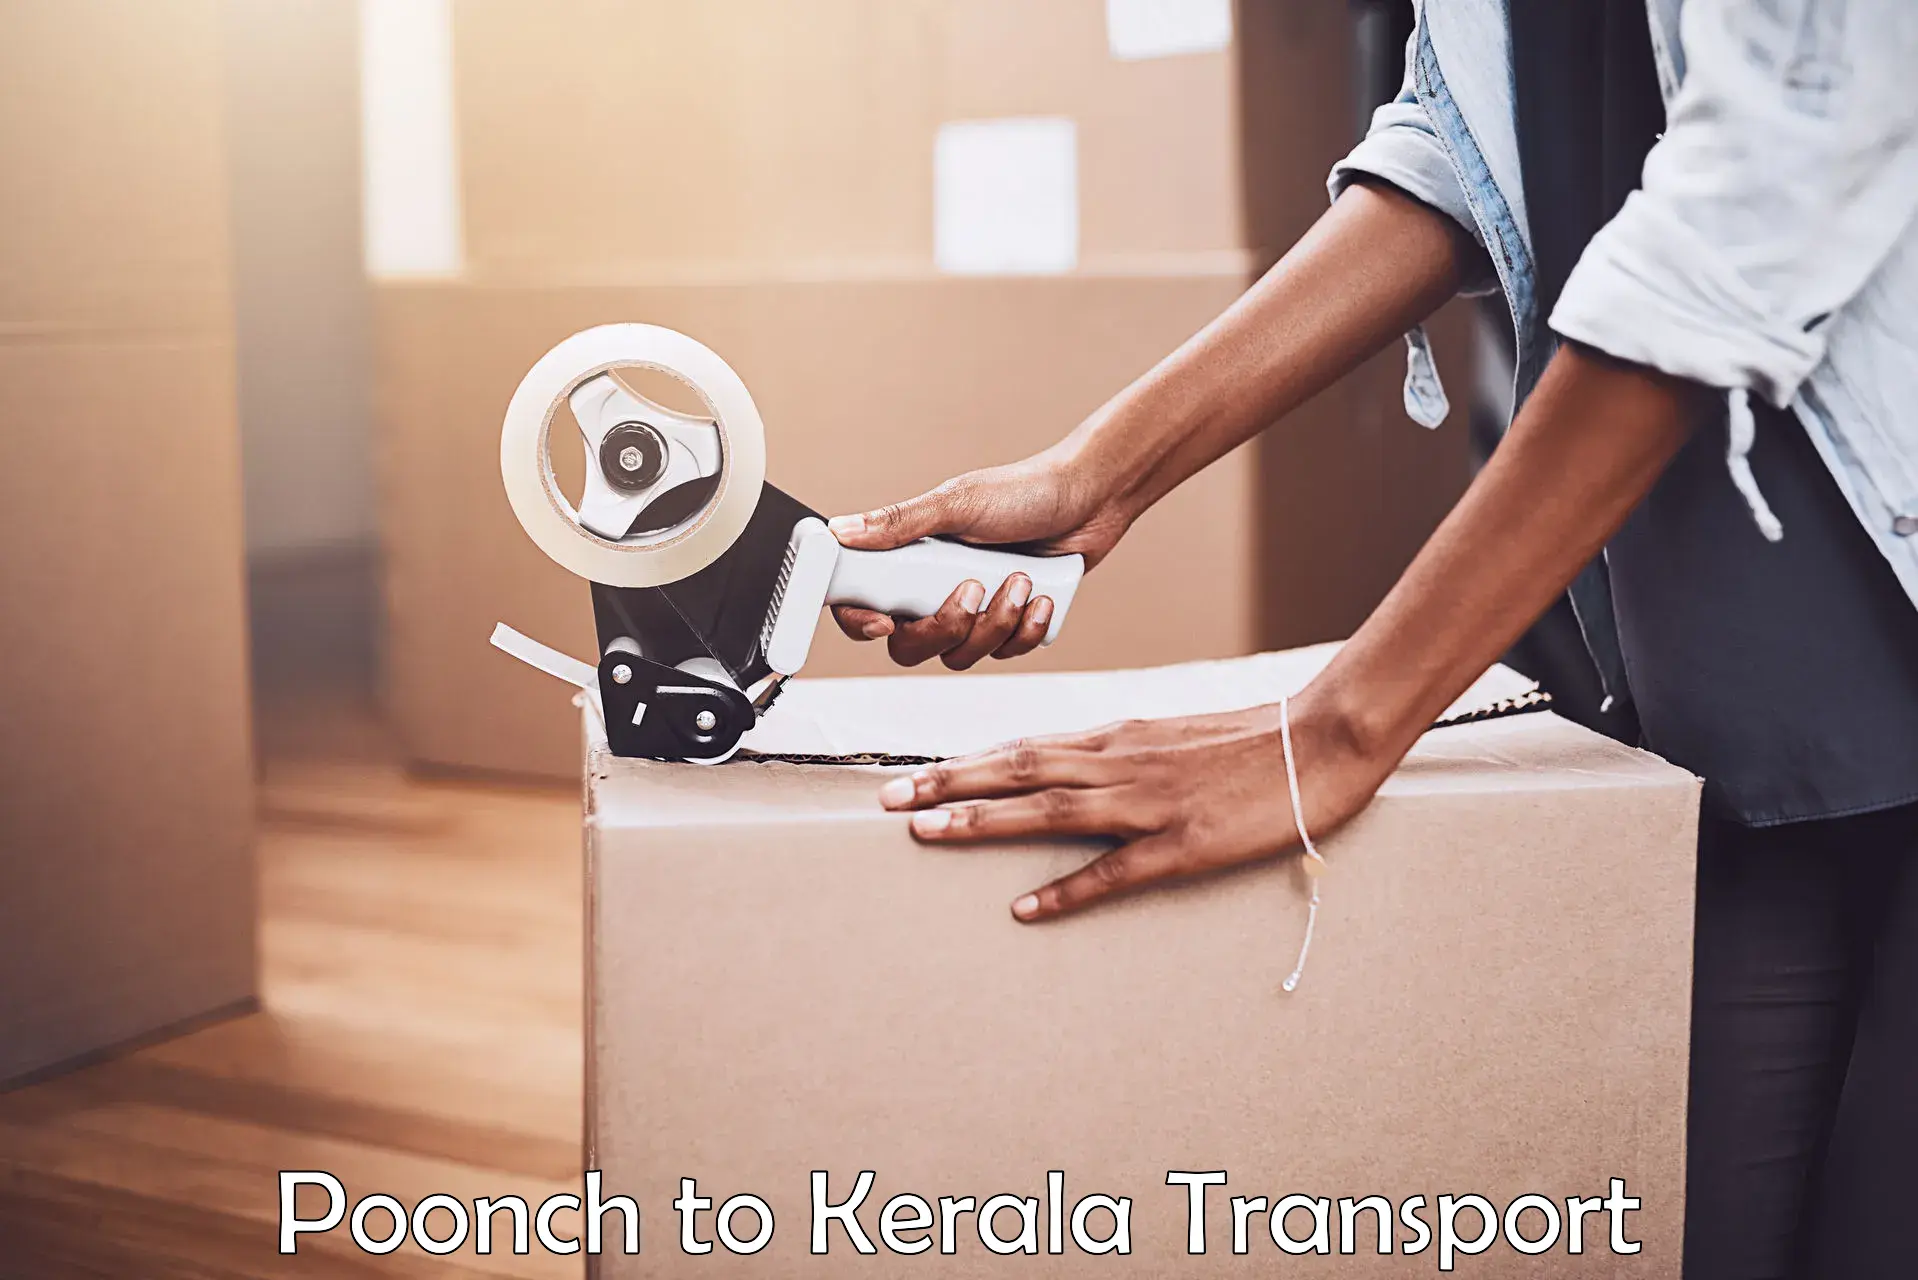 Commercial transport service Poonch to Kannur